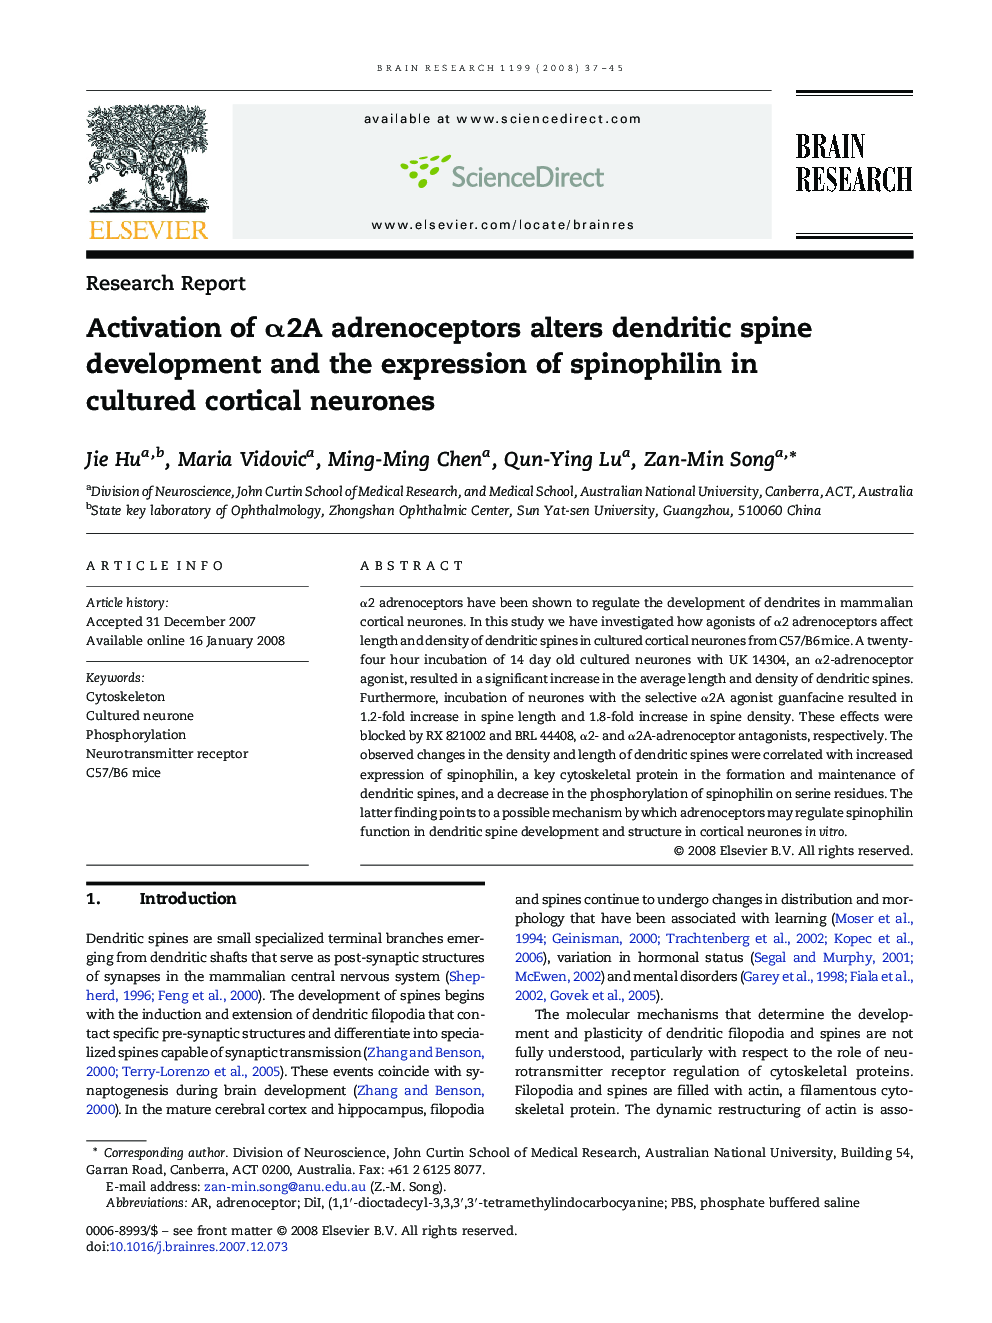 Activation of α2A adrenoceptors alters dendritic spine development and the expression of spinophilin in cultured cortical neurones